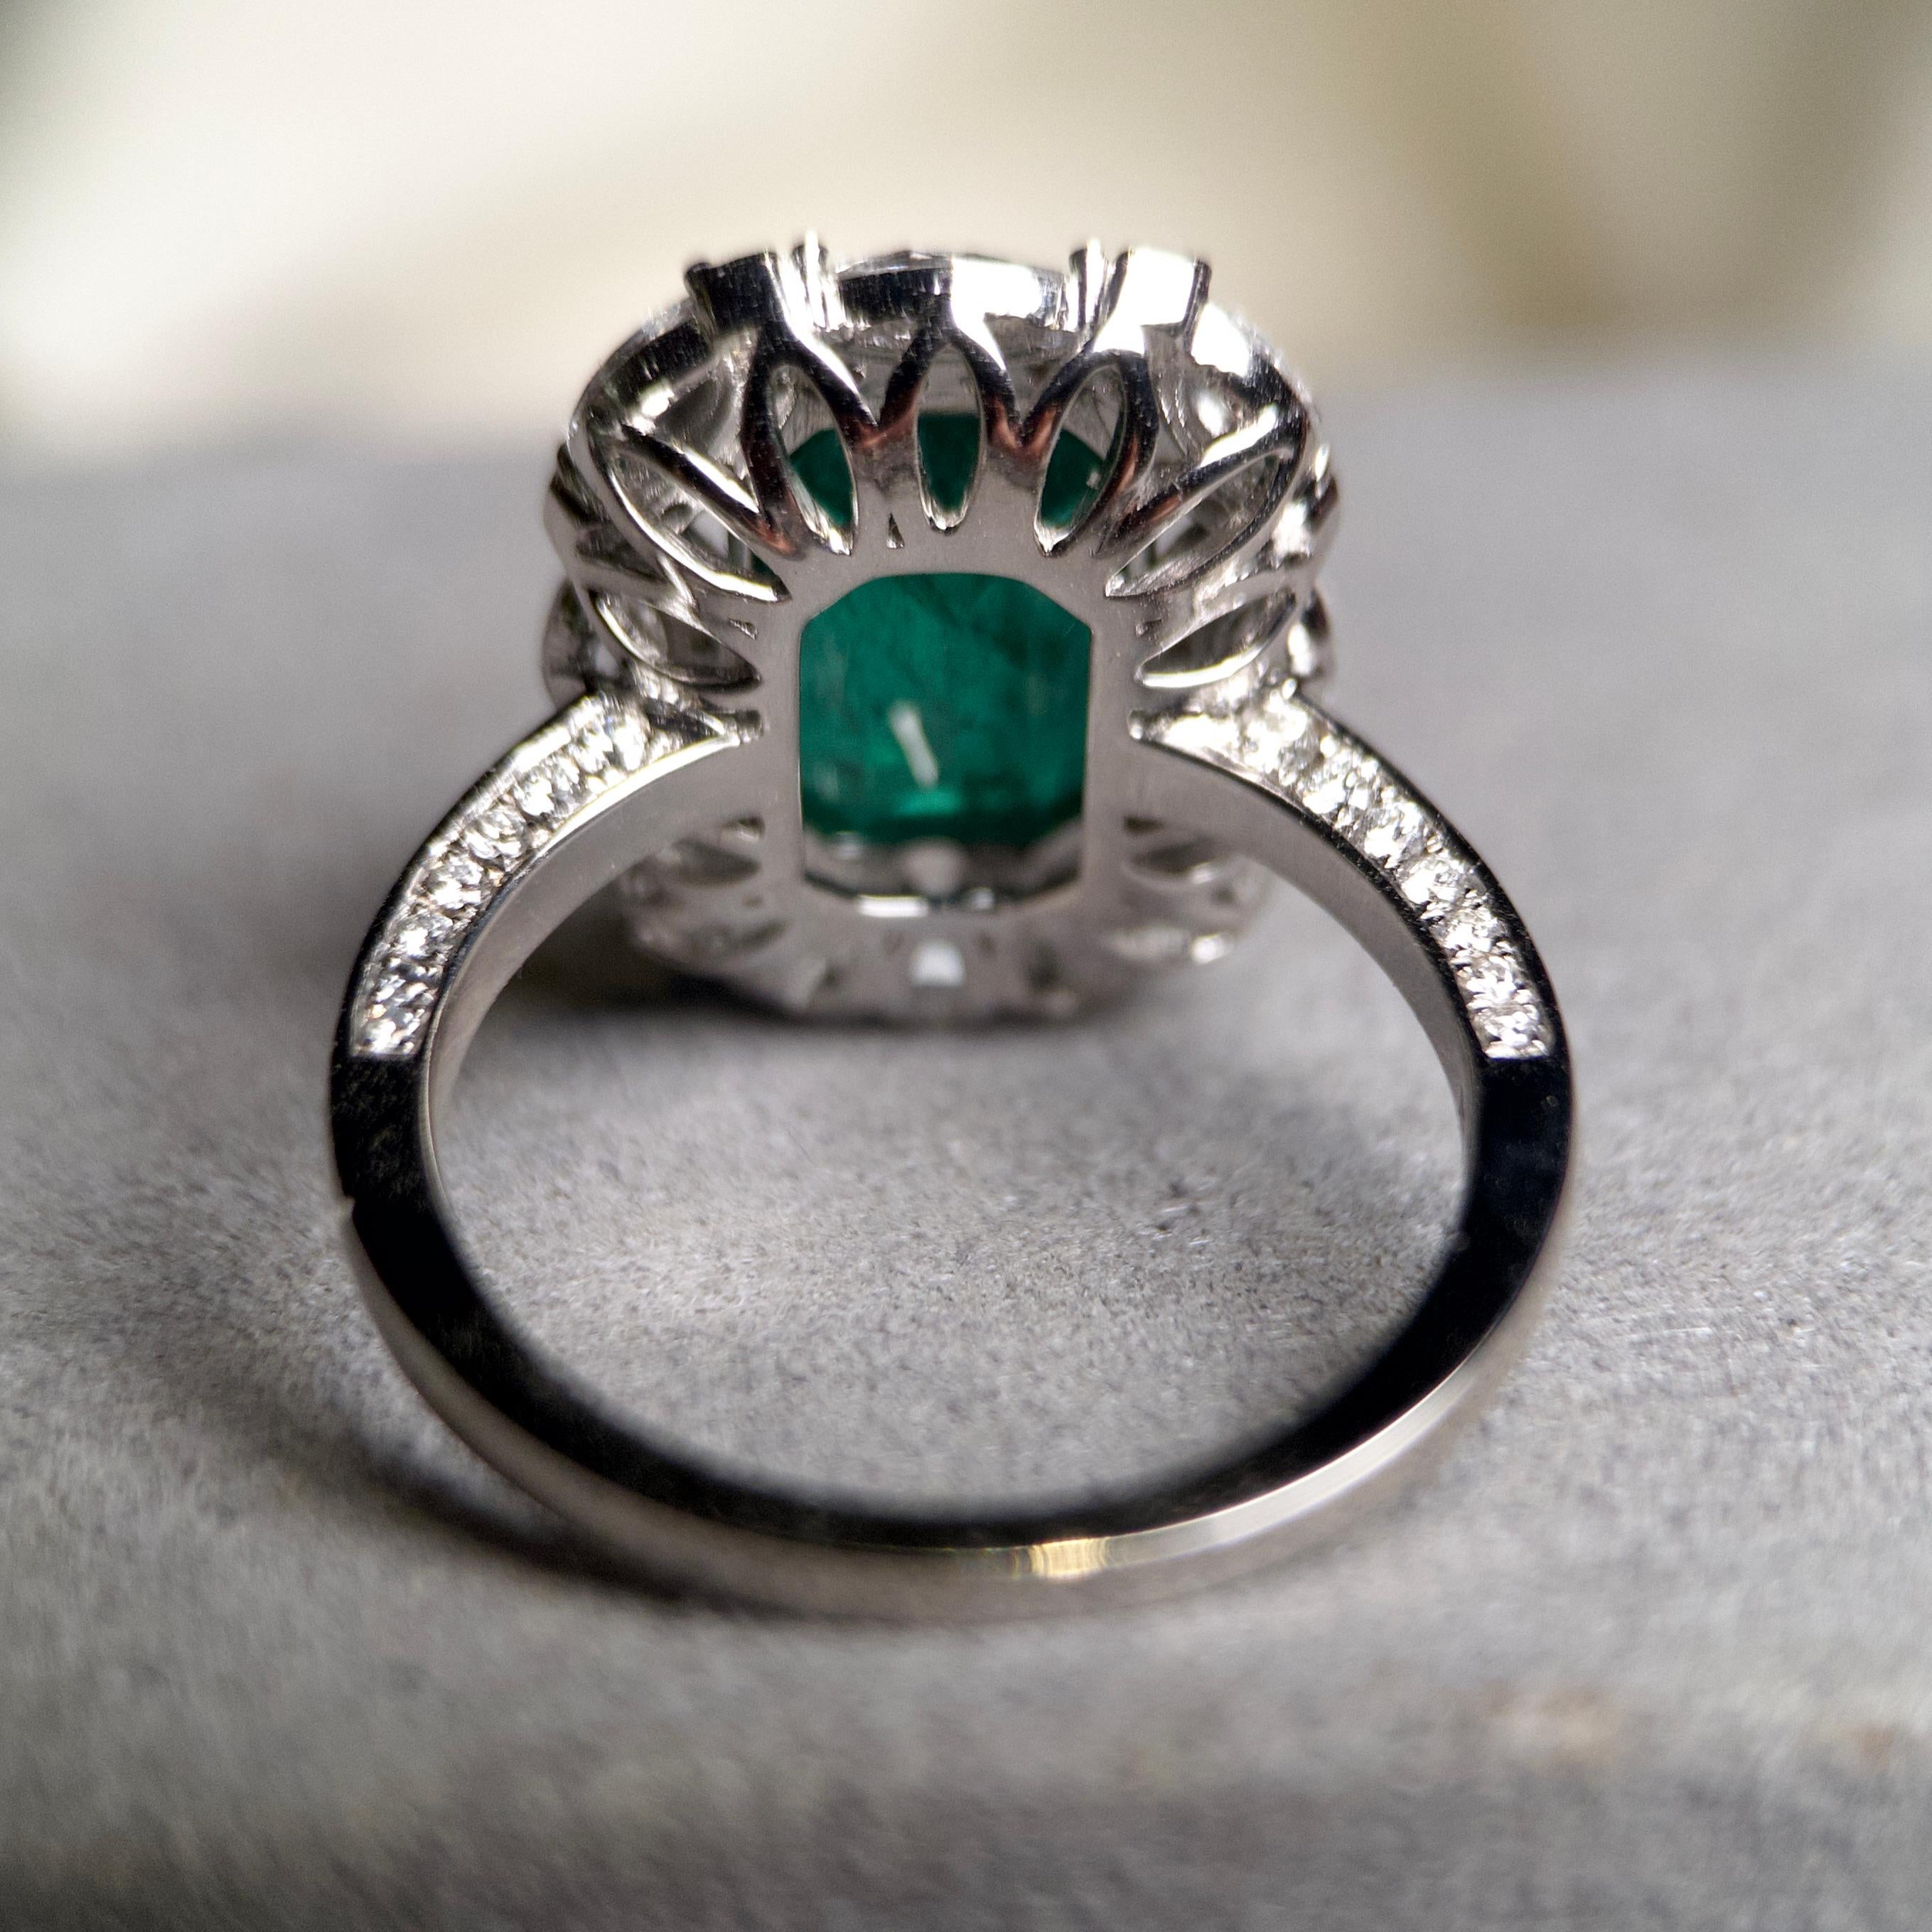 emerald ring meaning